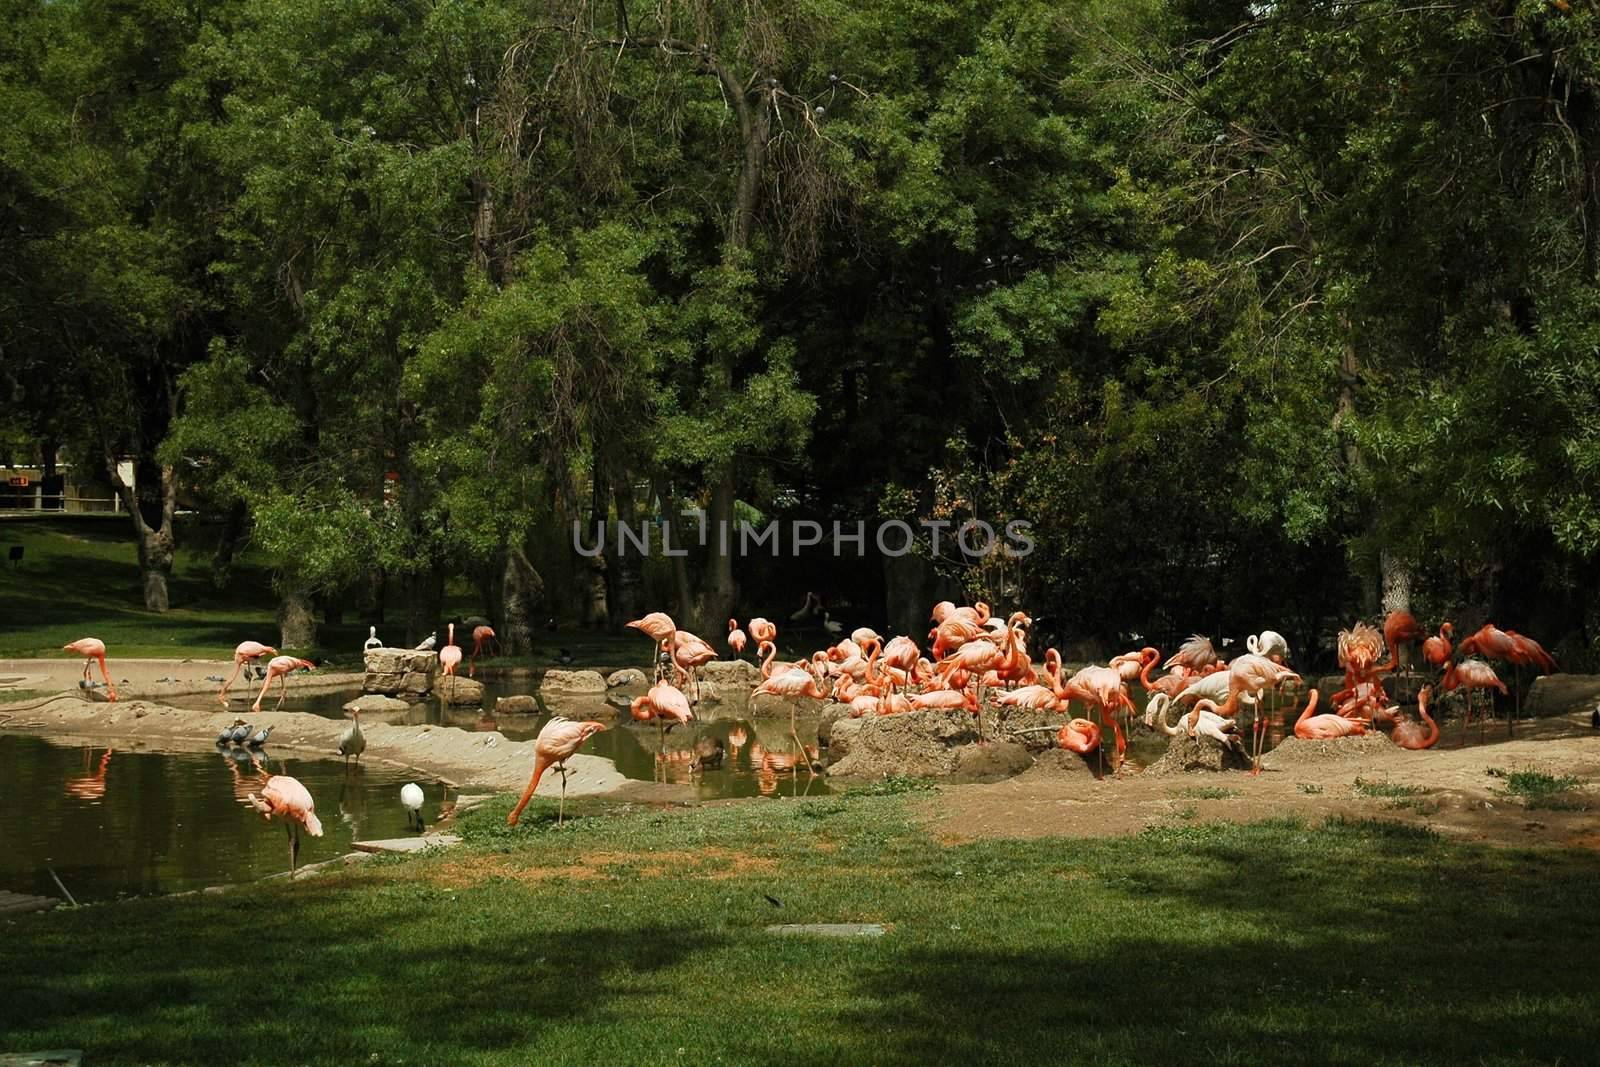 flamingo in Madrid zoo with green grass and trees